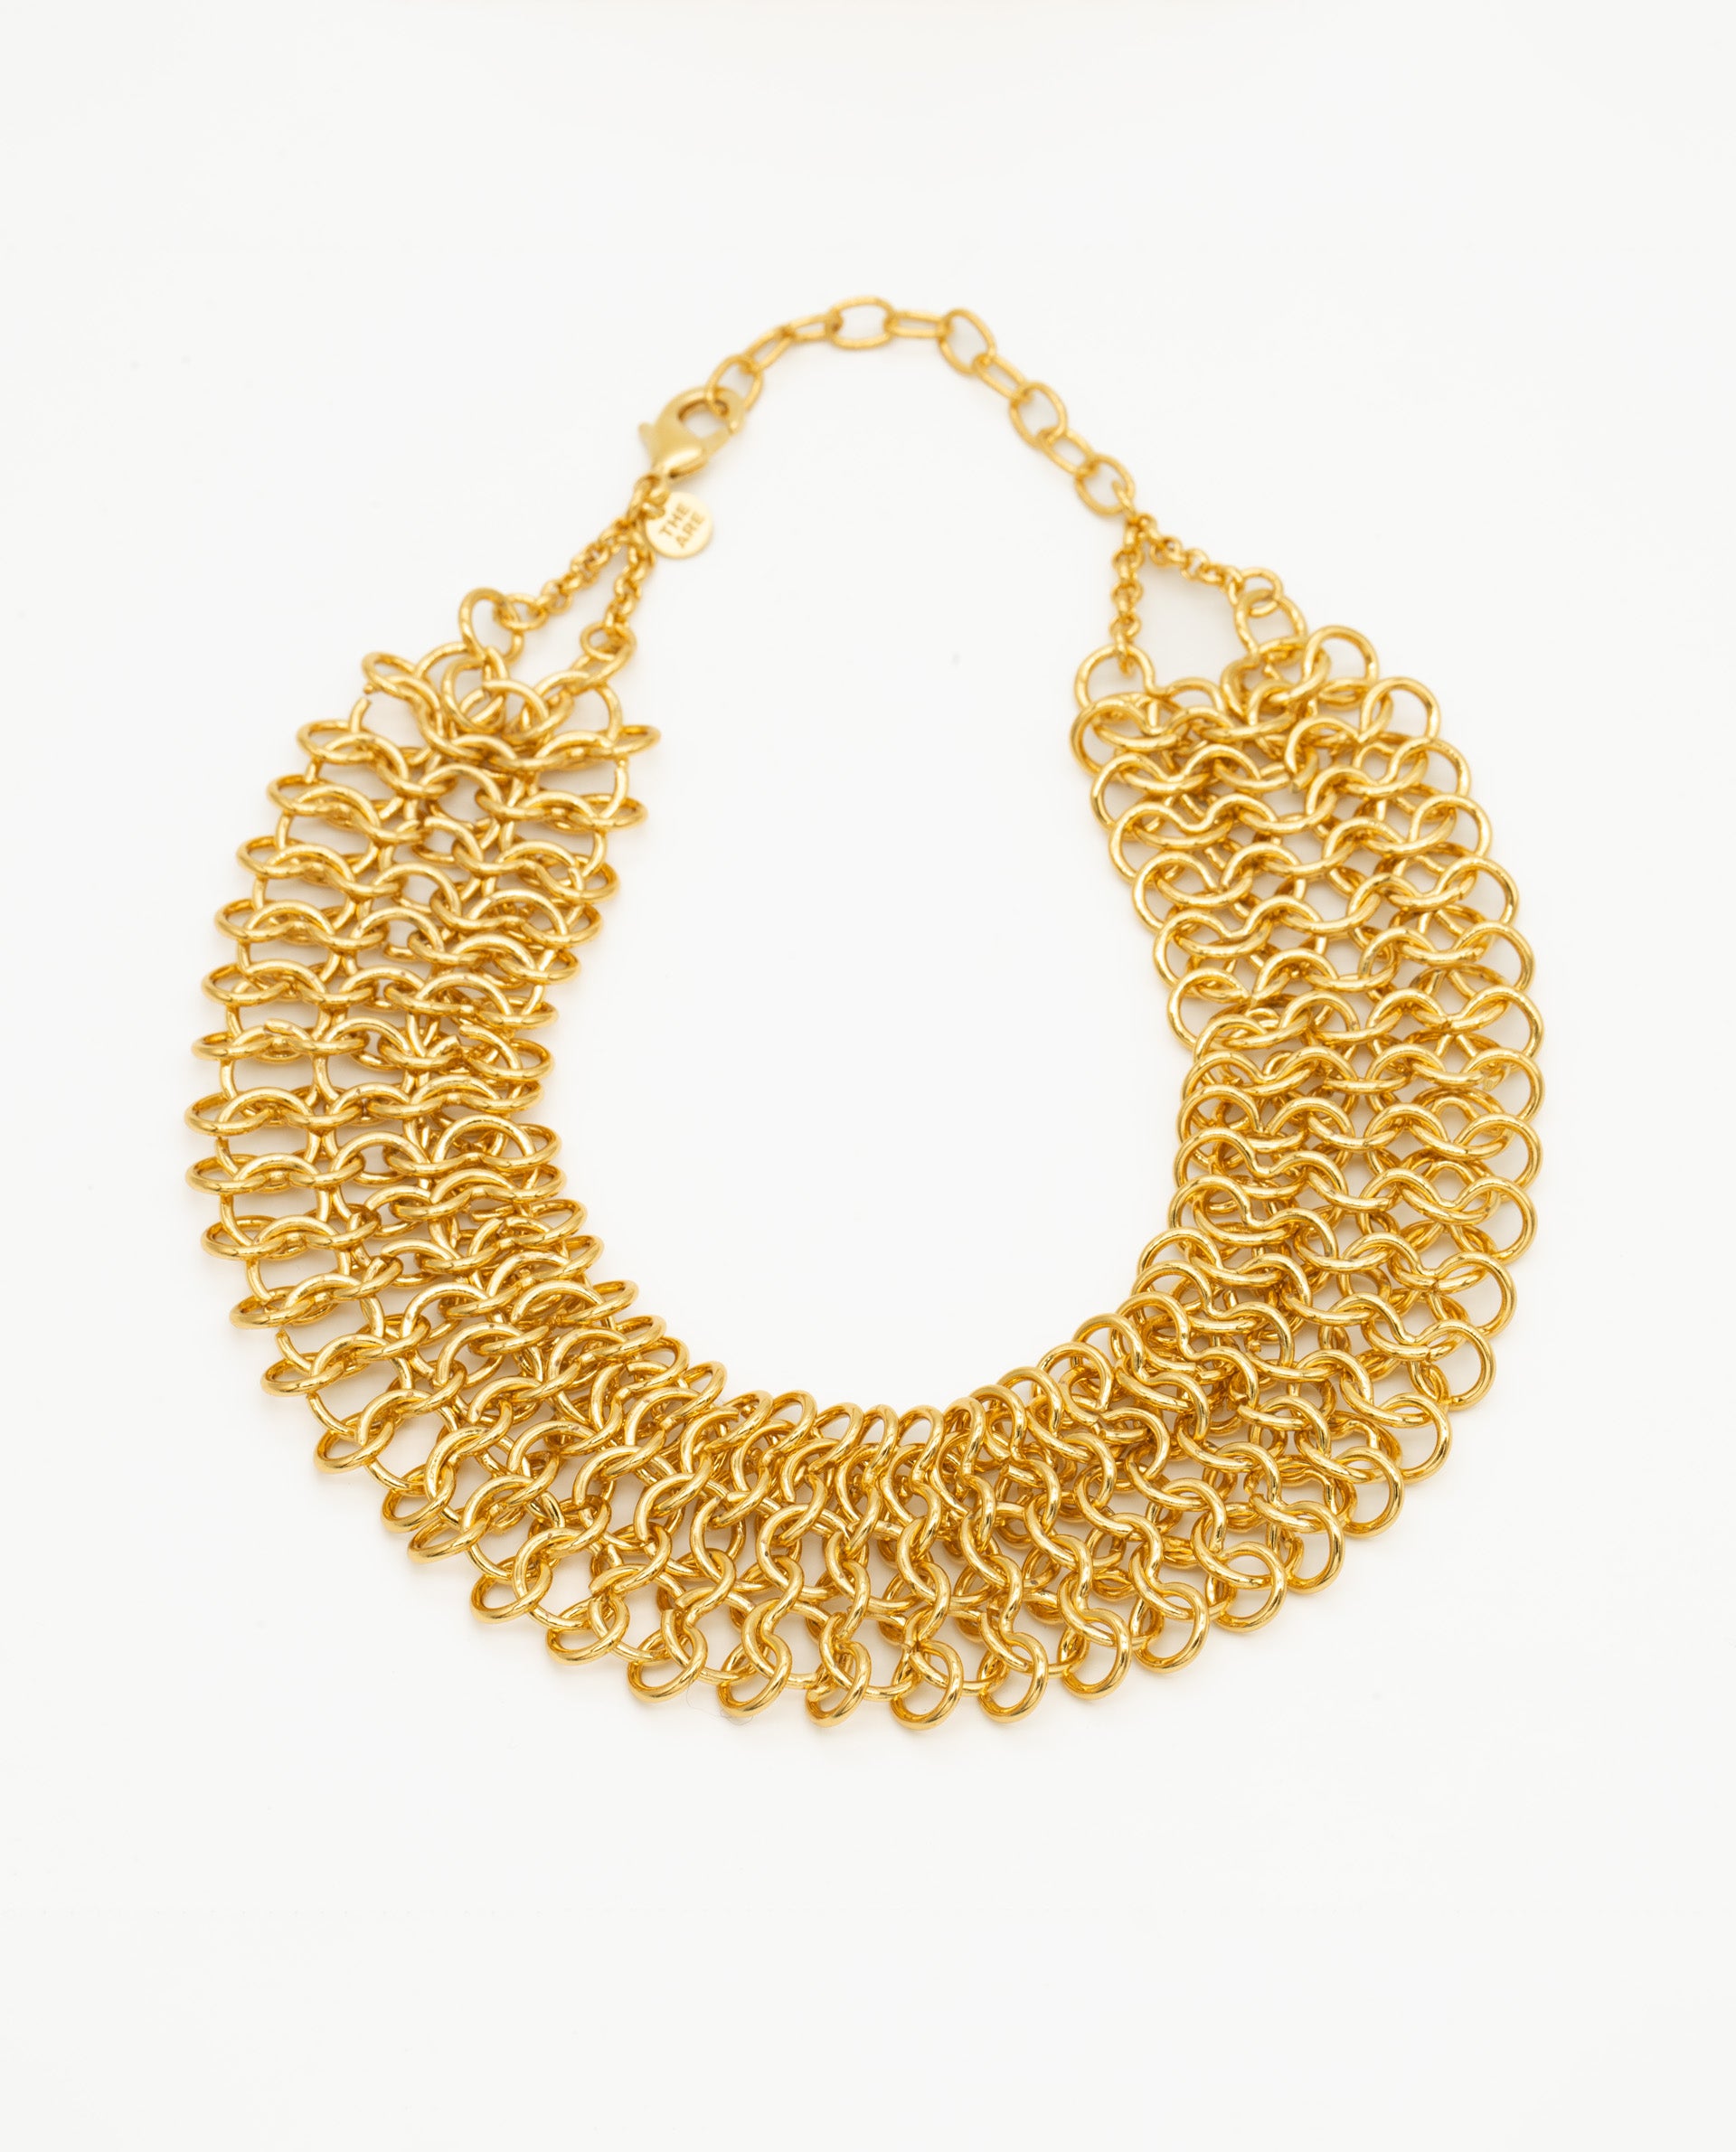 RISE NECKLACE - GOLD PLATED